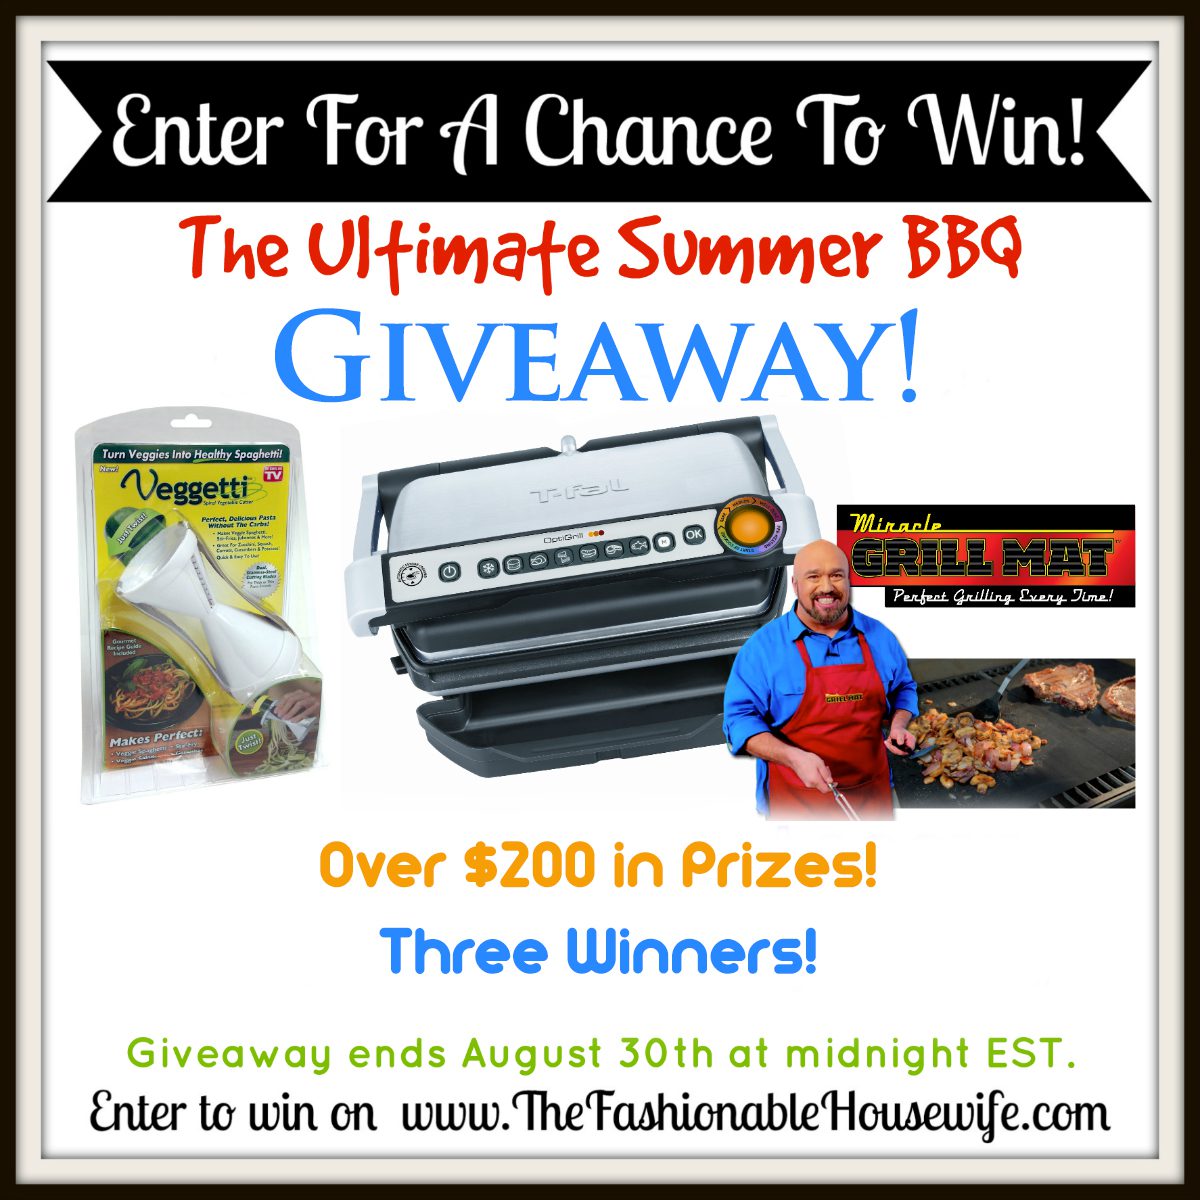 Enter To Win the Ultimate Summer BBQ Giveaway